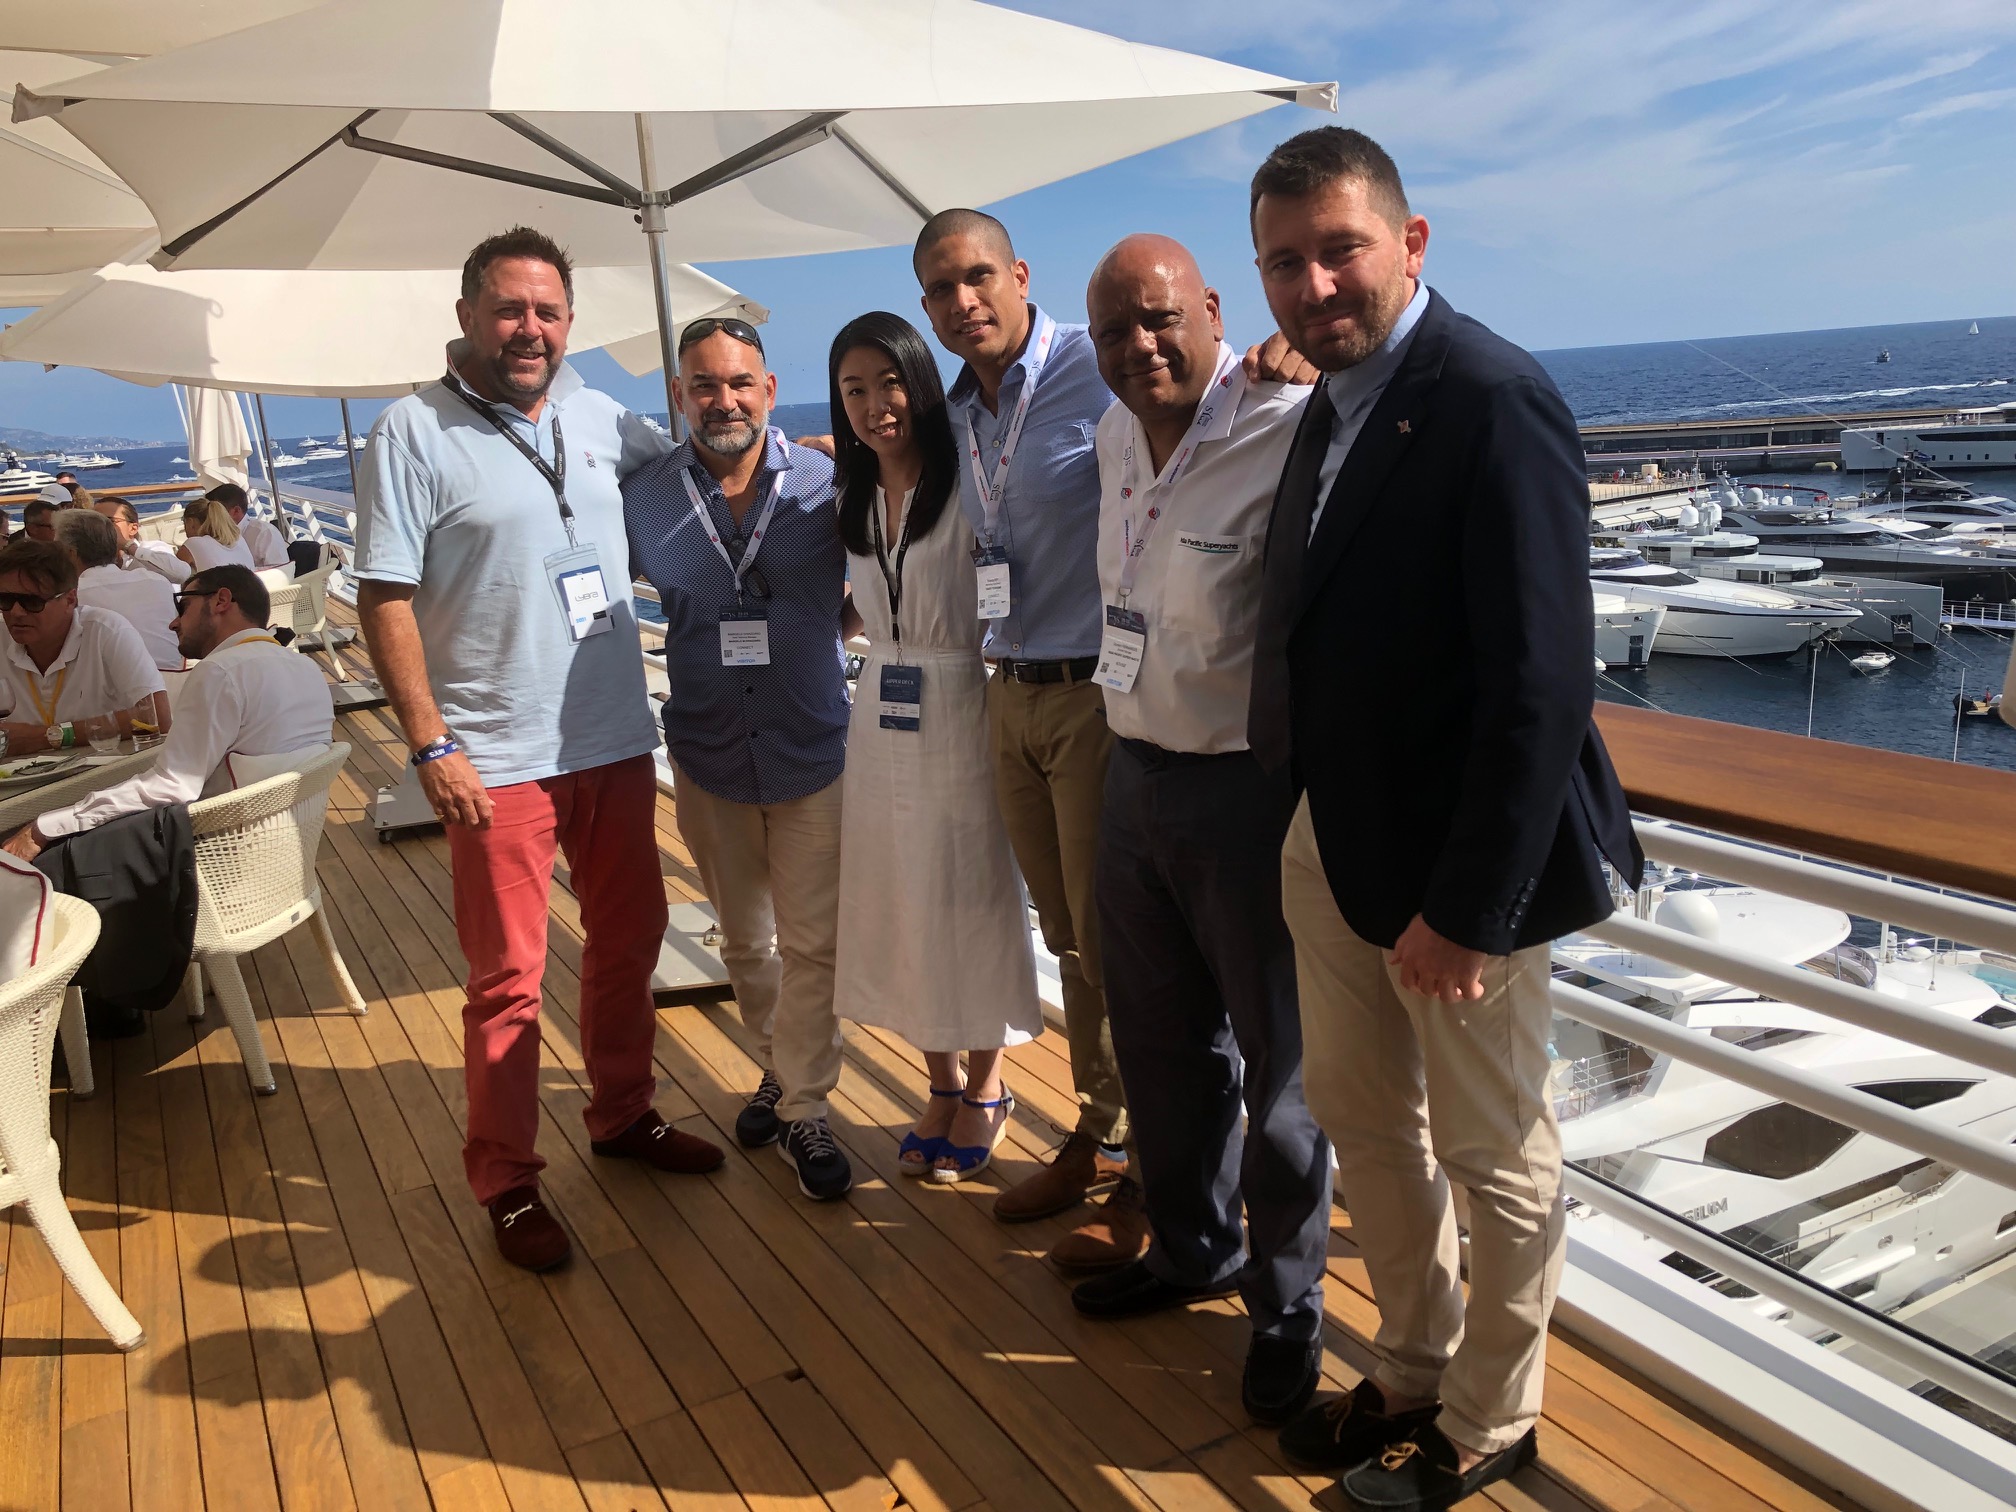 MYS-2021-Gordon-Fernandes-APS-Director-and-Nigel-Beatty-Chairman-of-APSA-welcomed-superyacht-industry-friends-and-colleagues-from-around-the-world..jpg